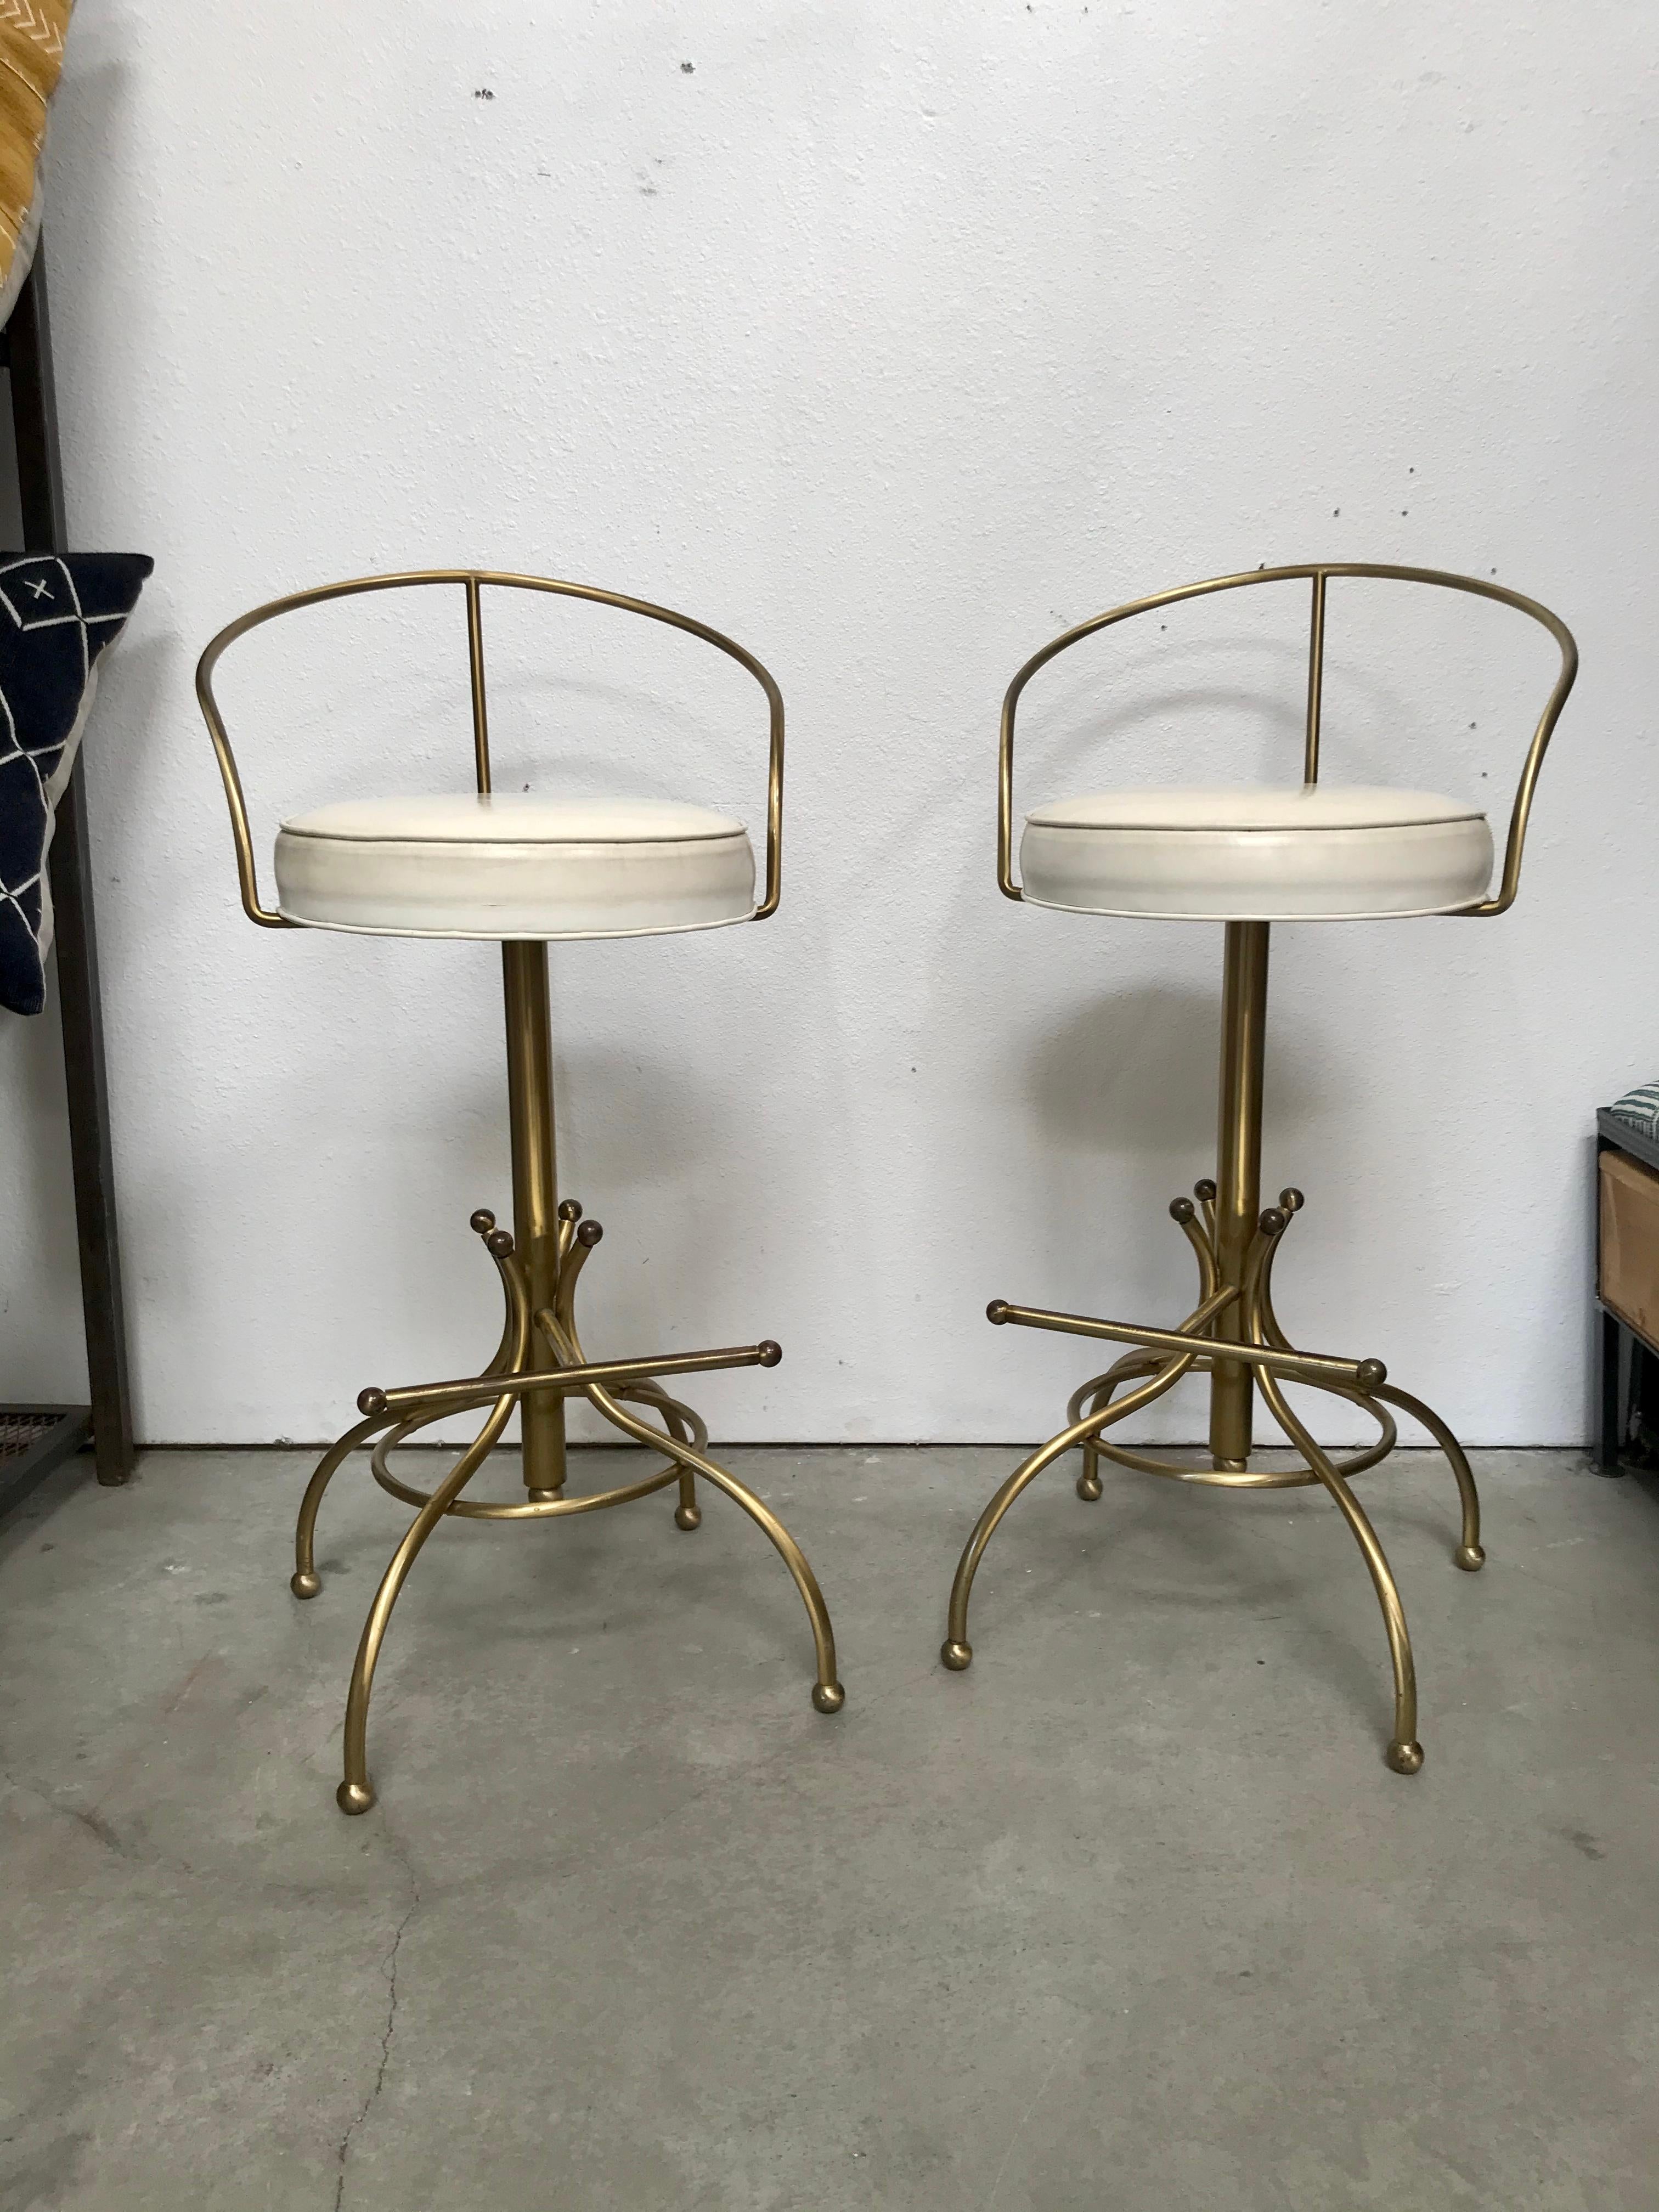 classic CHJ California design
Elegant brass with vinyl seats
Original vintage condition showing a nice patina with minor wear
No damage or repairs
Solid and sturdy.

